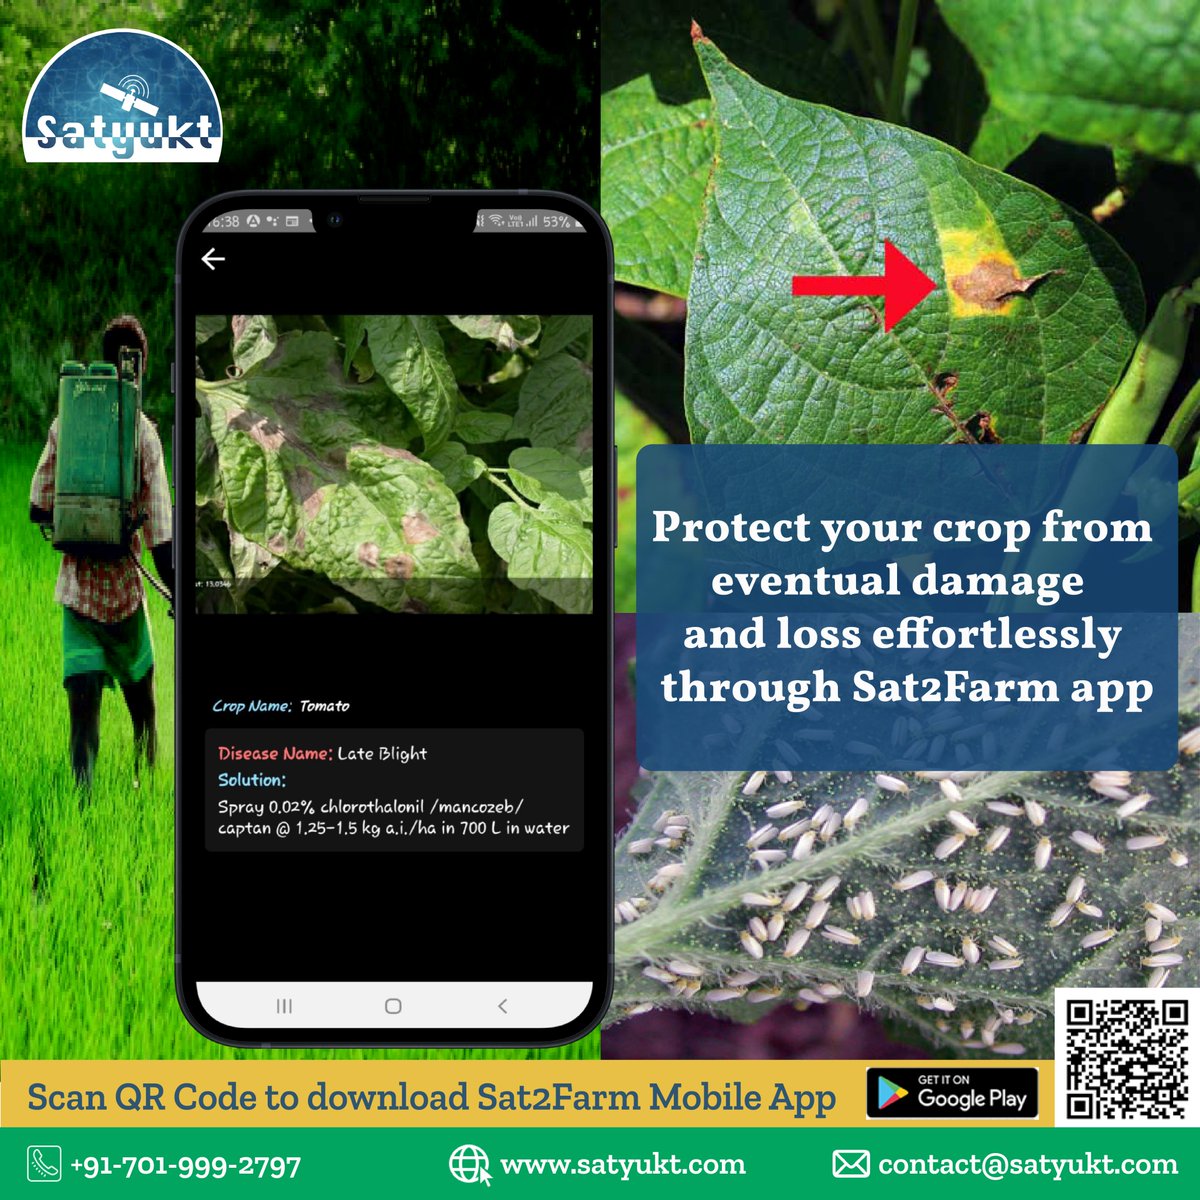 A progressive reduction in yield. #pestsanddiseases.
#agritech #agribusiness #agriculture #agriculturelife #precisionfarming #satelliteimagery #remotesensing #pestandisease #insects #farming #sustainableagriculture #pestmanagement #modernfarming